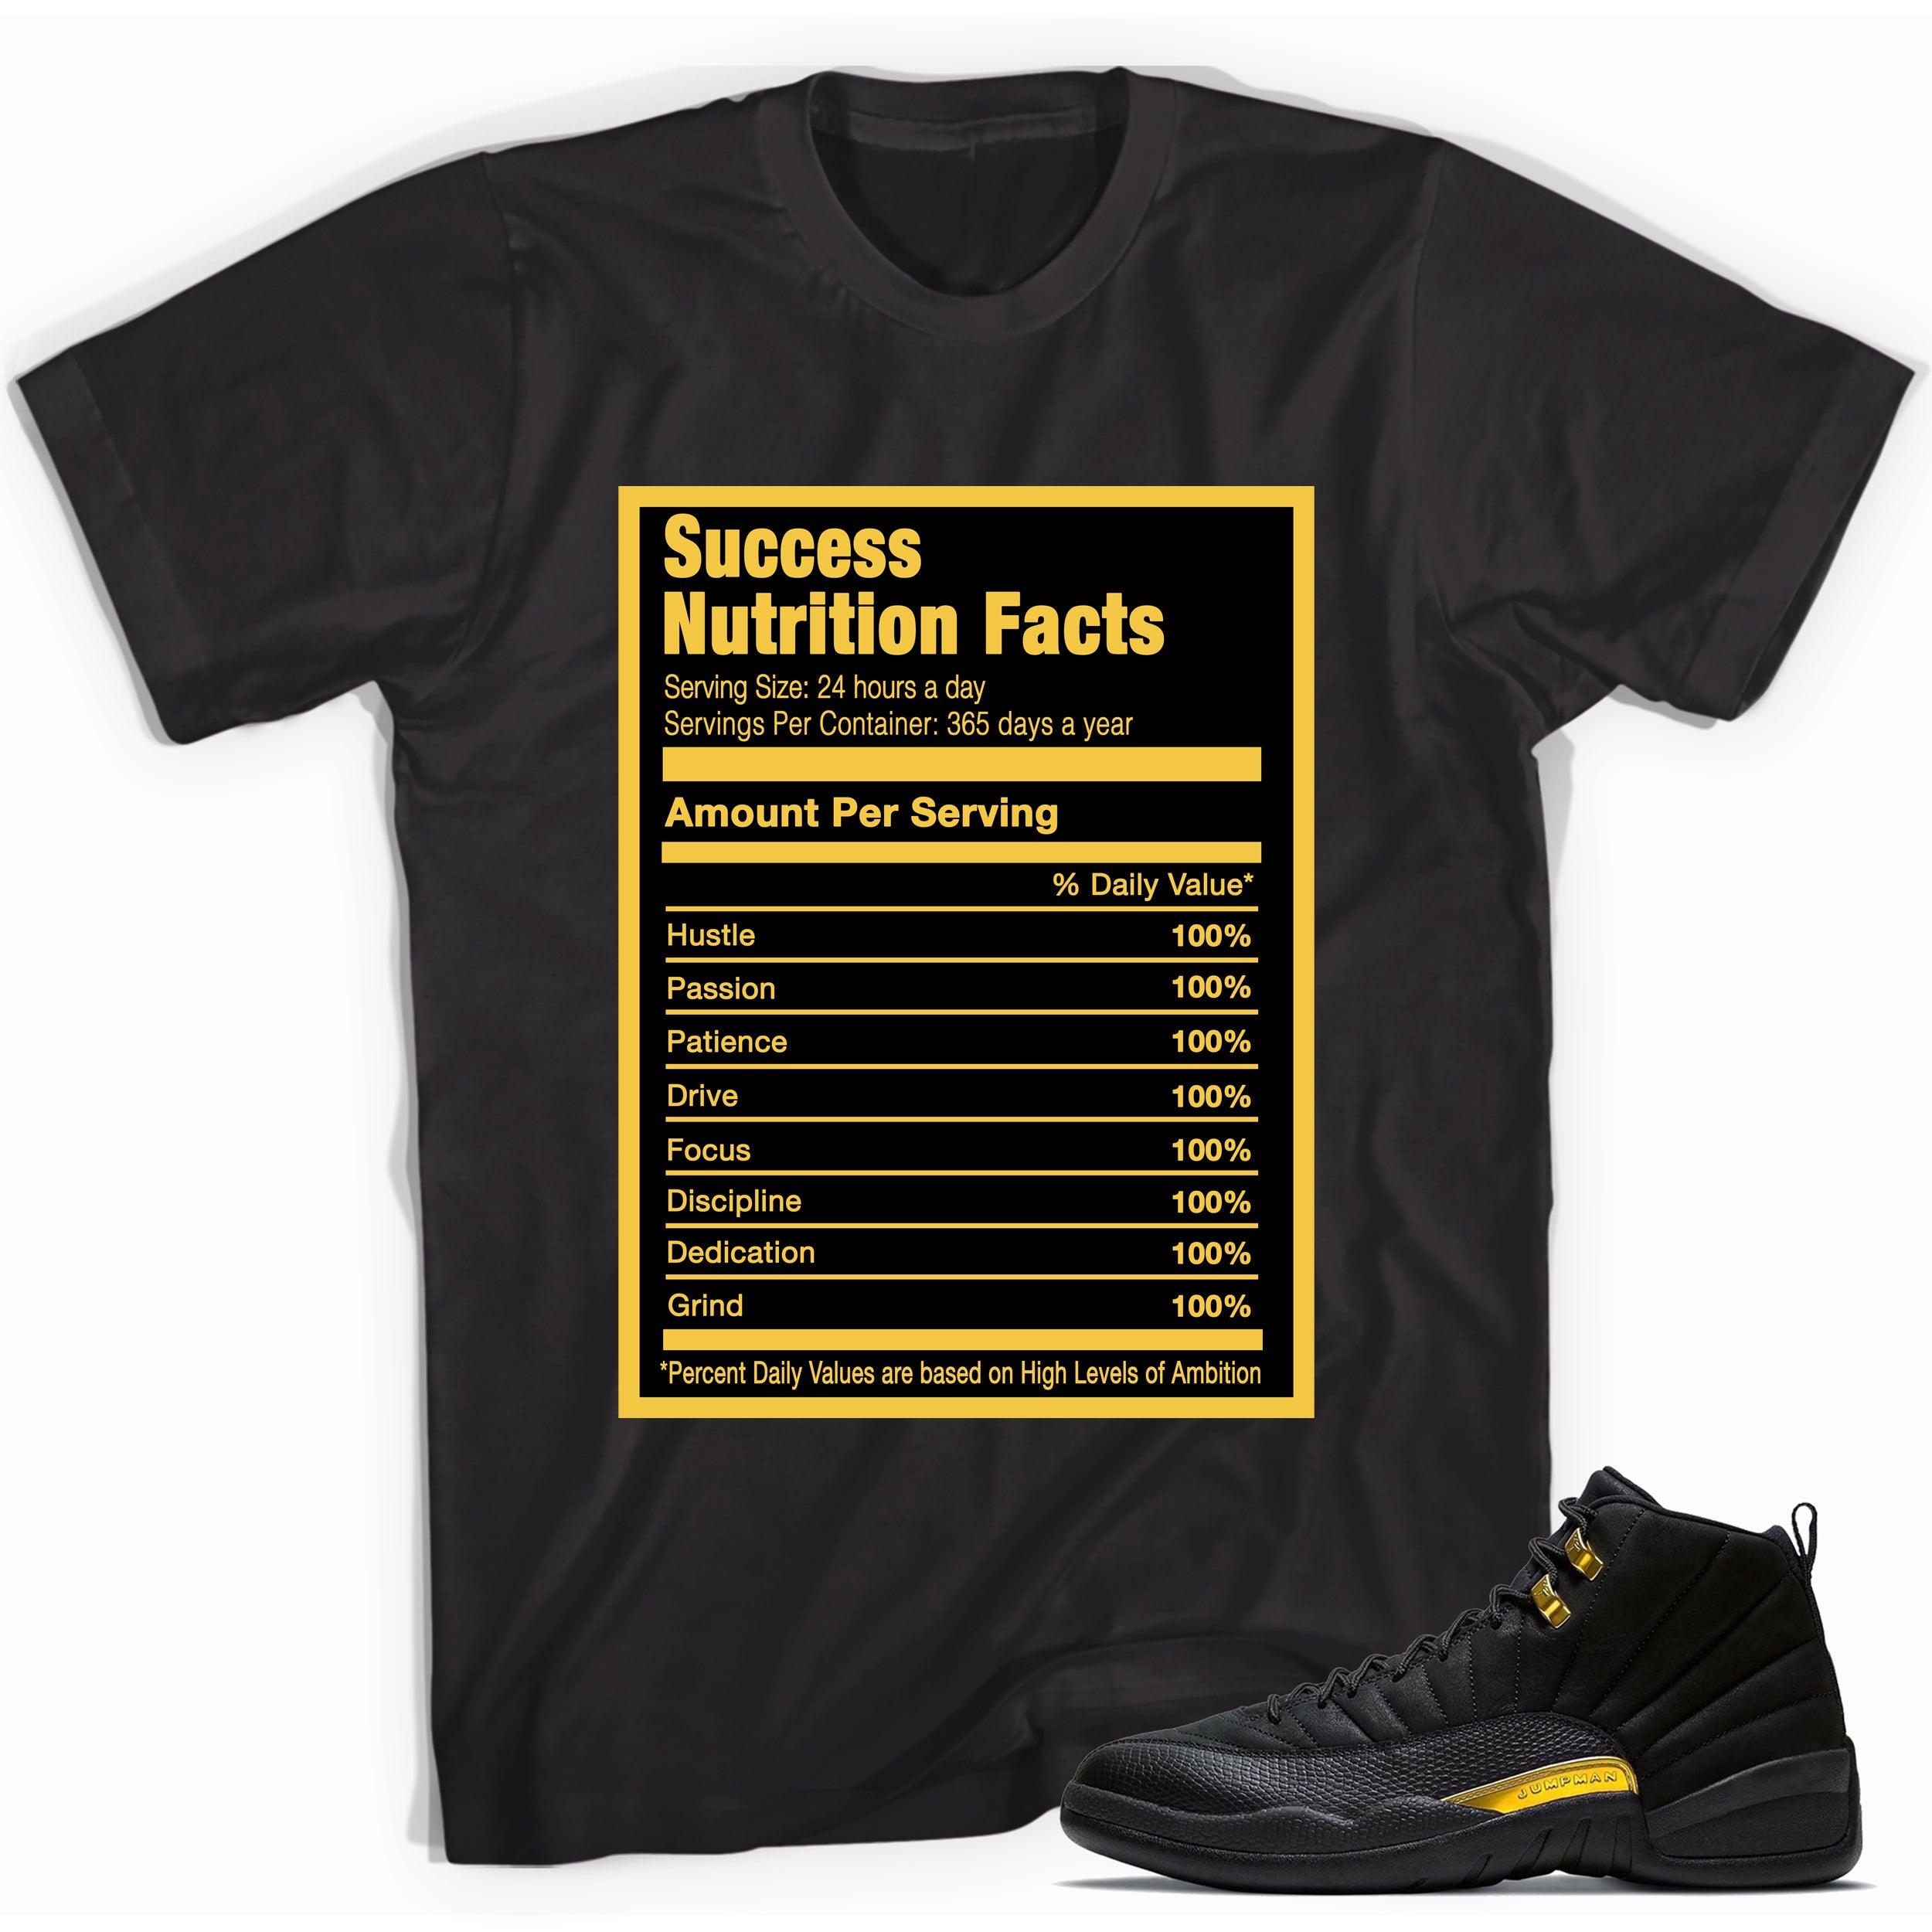 Success Nutrition Facts Shirt AJ 12 Black Taxi Sneakers photo